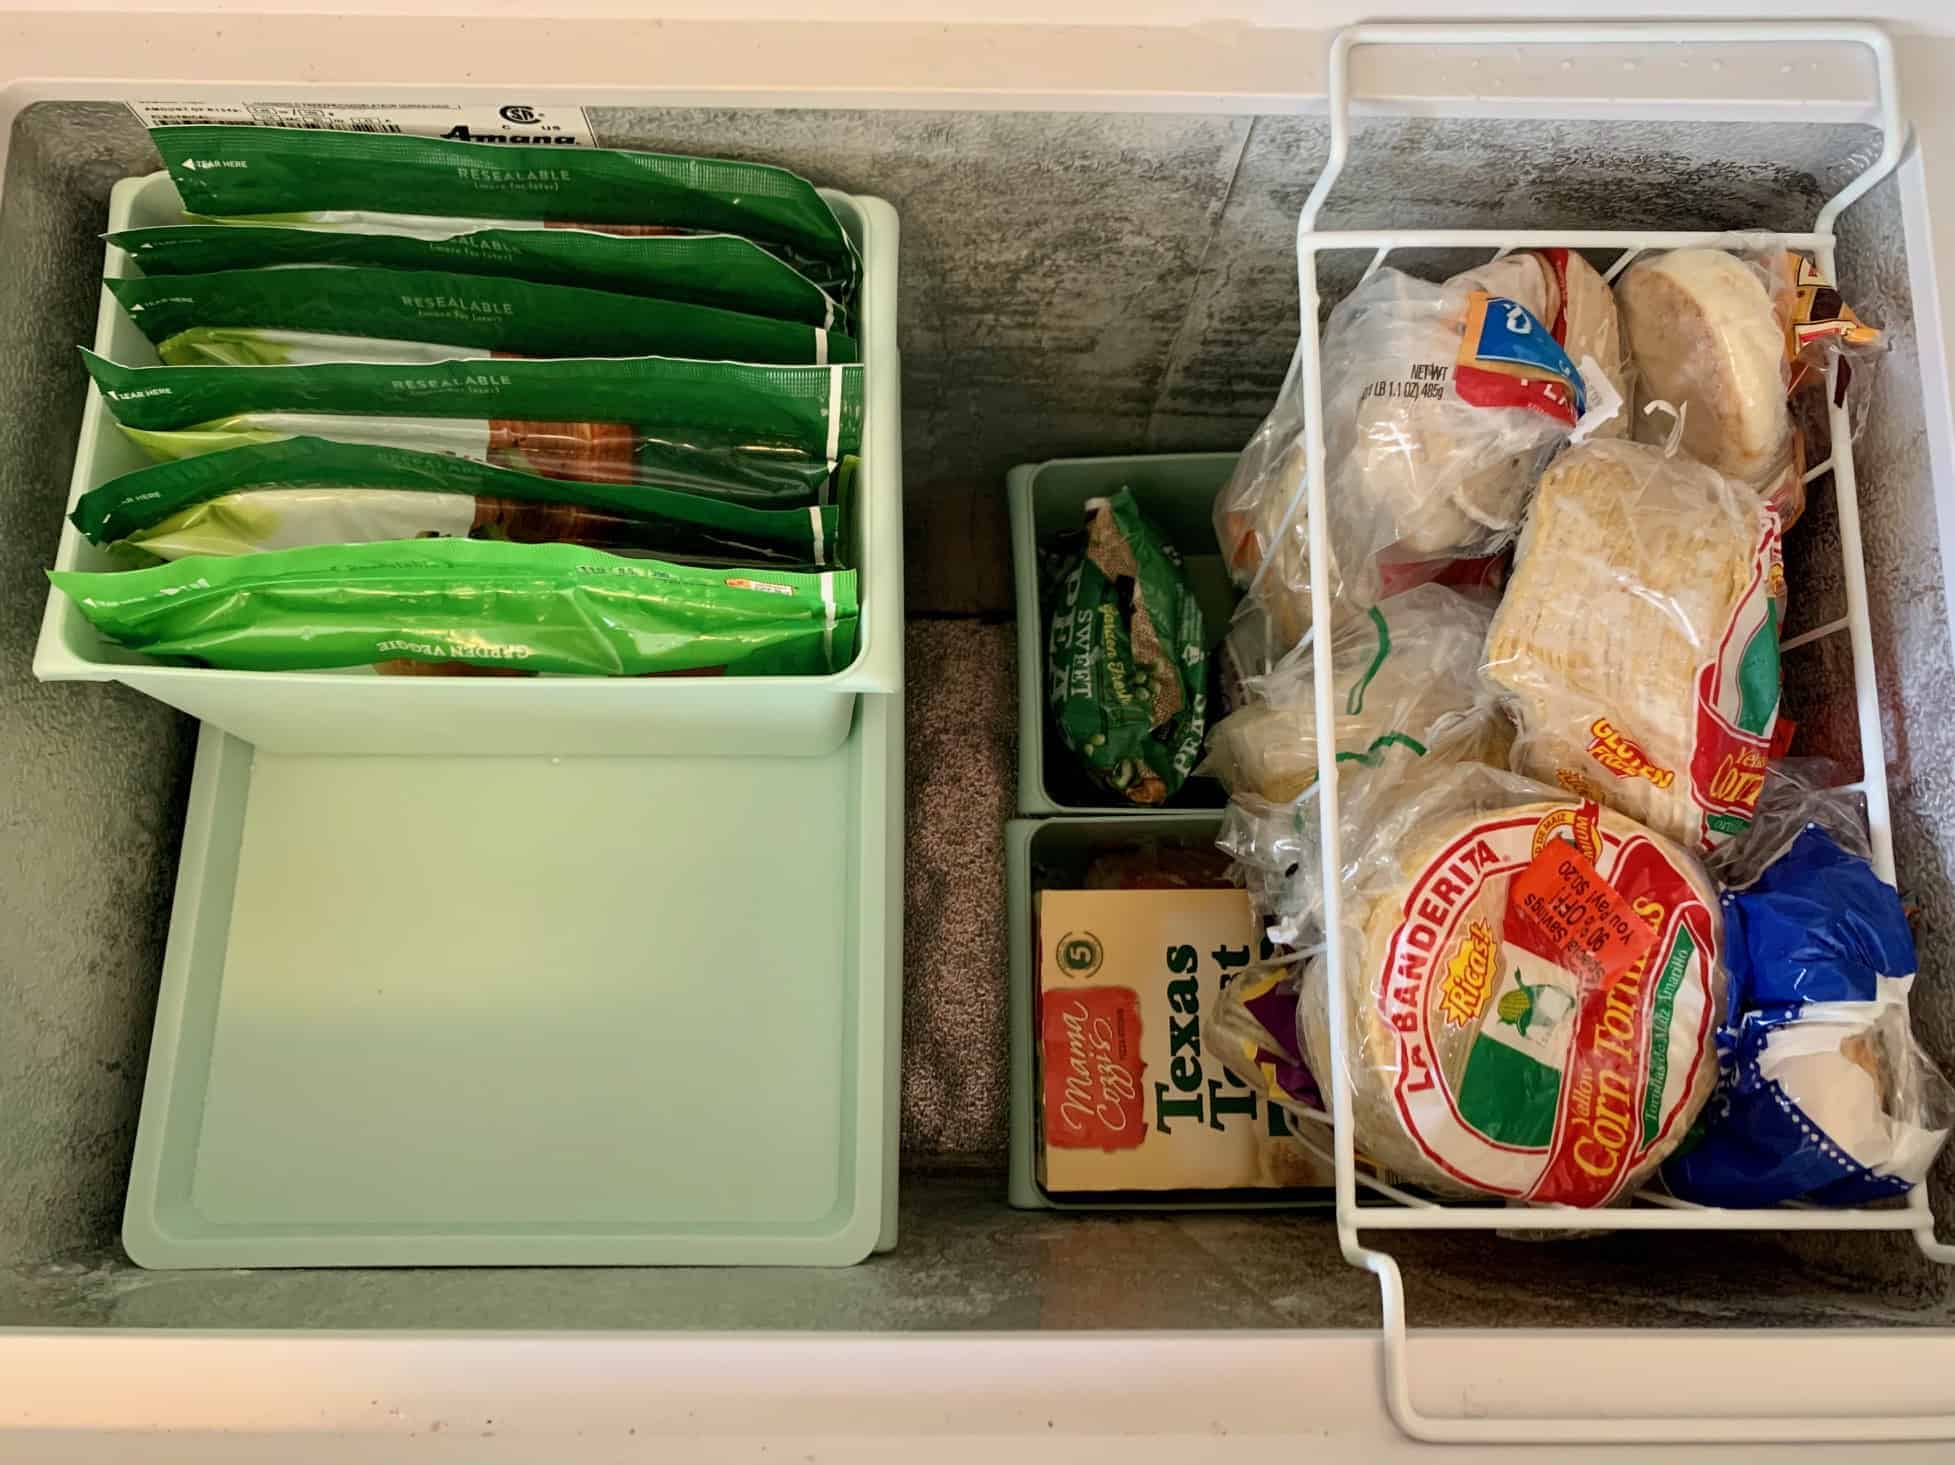 How to organize your chest freezer with baskets and dividers. Deep freezer organization tips and tricks on a budget!